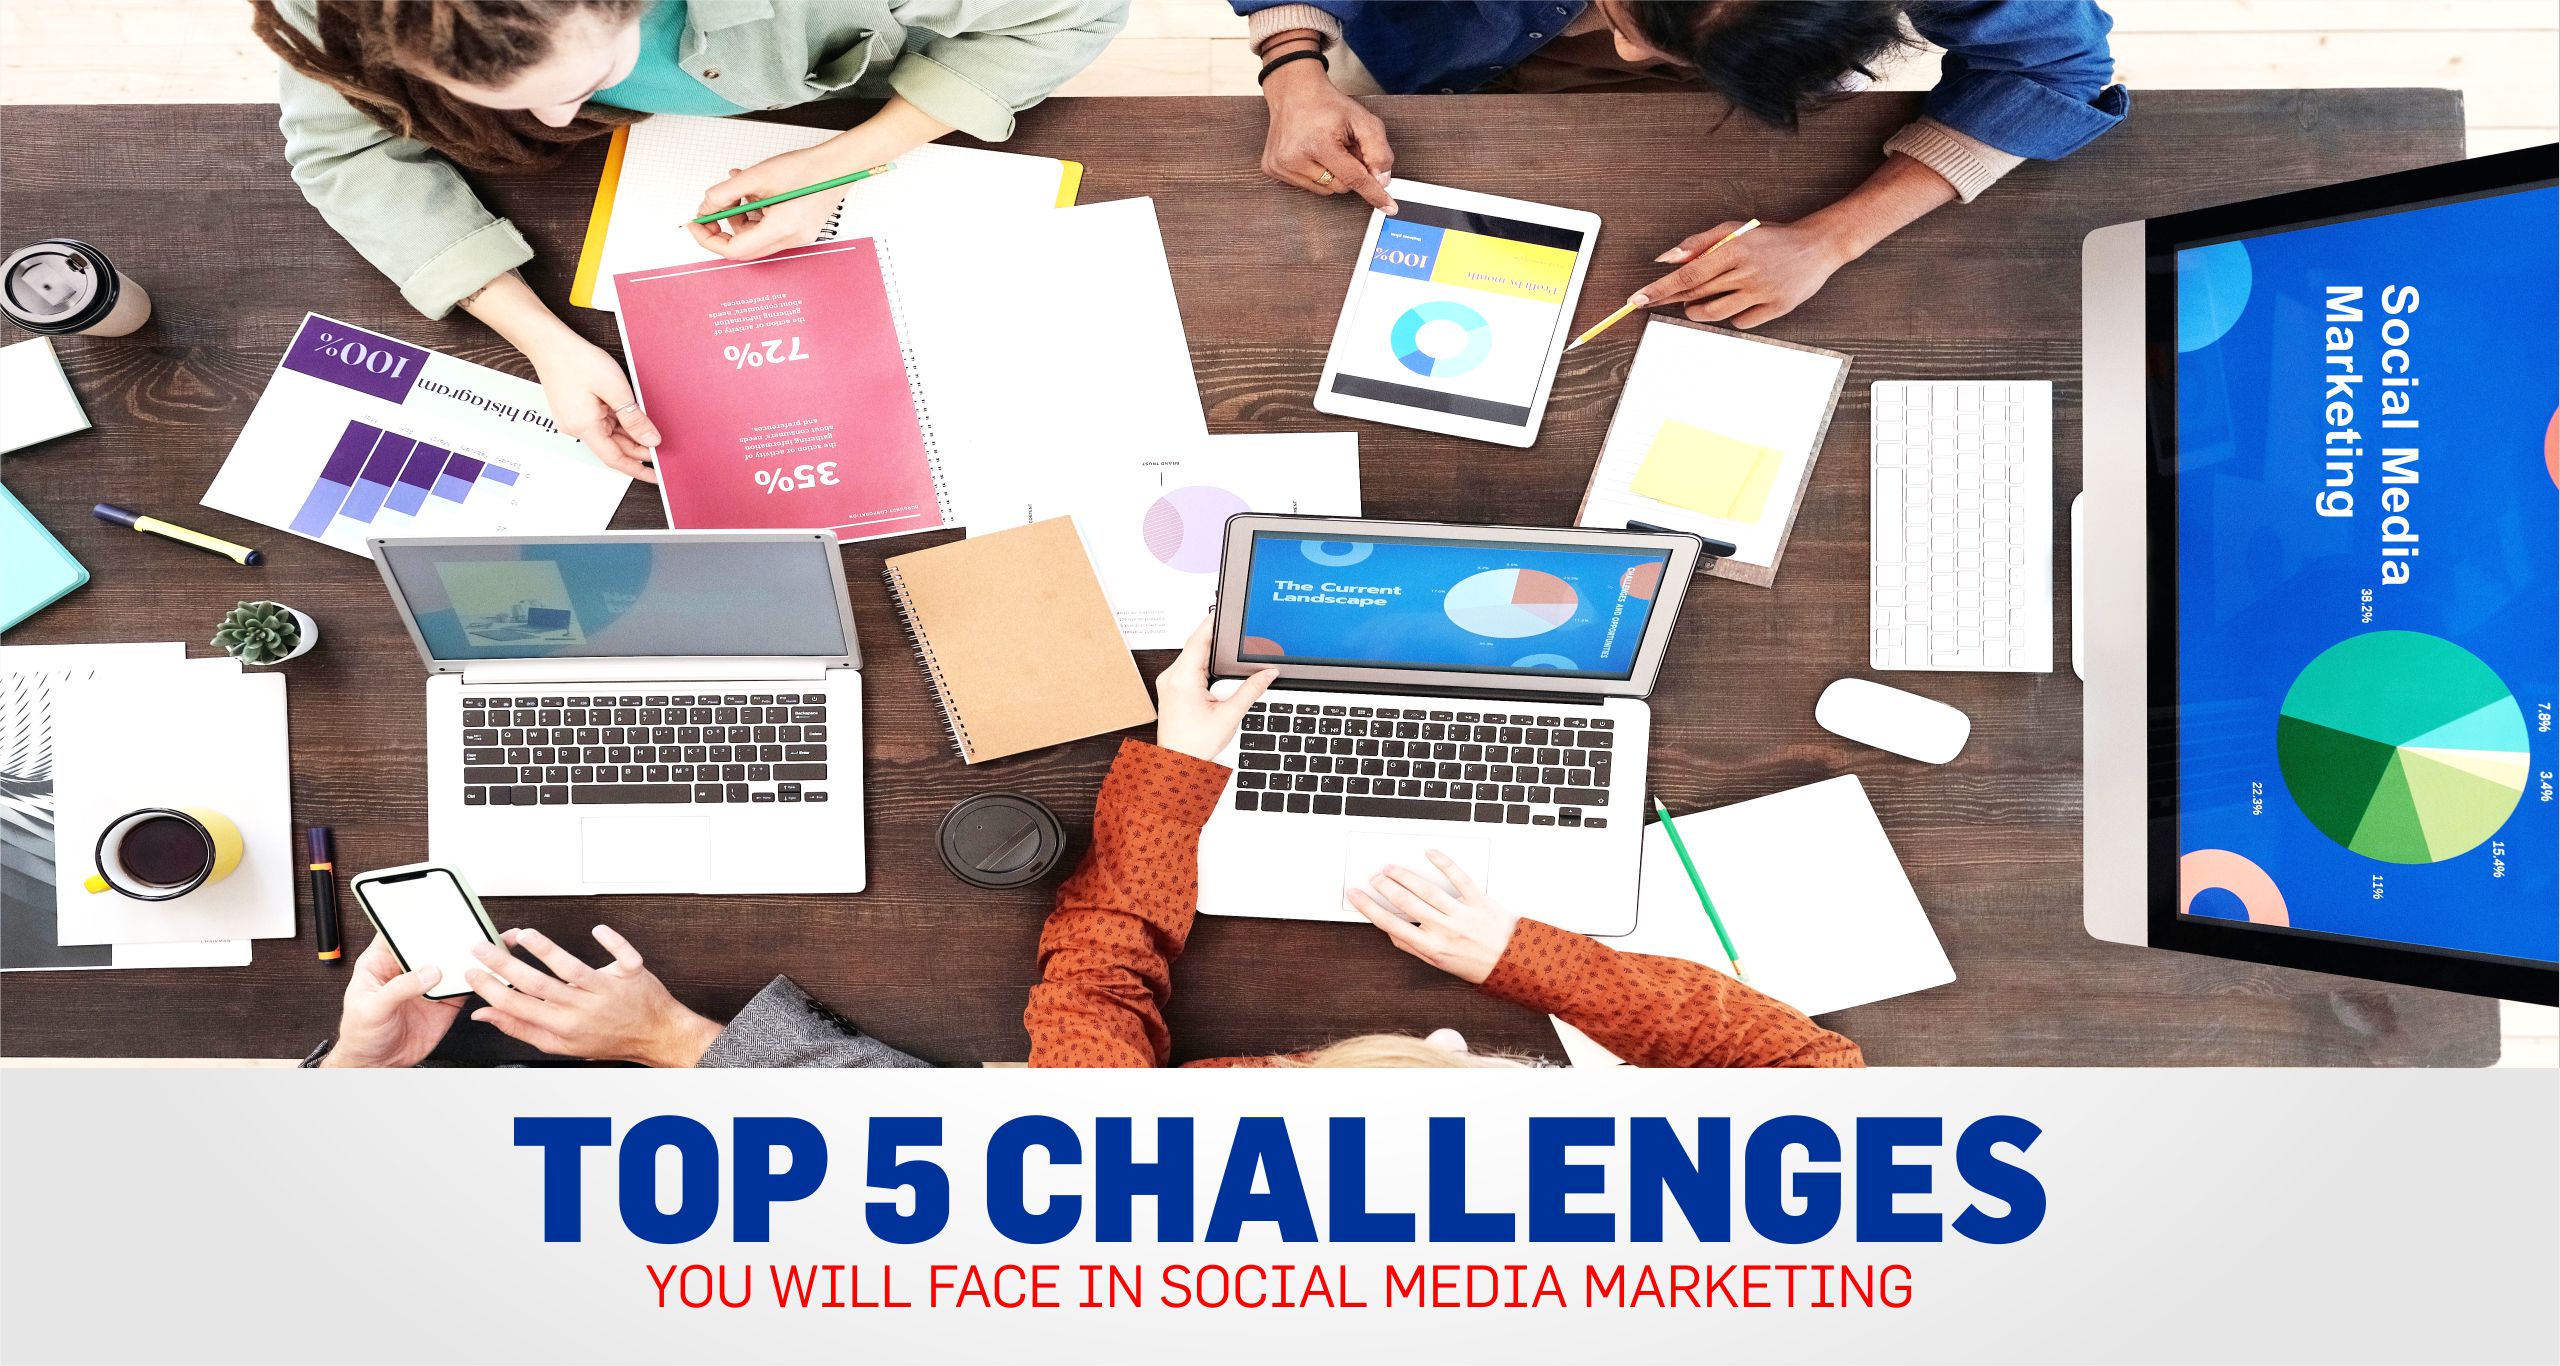 Top 5 Challenges You Will Face In Social Media Marketing